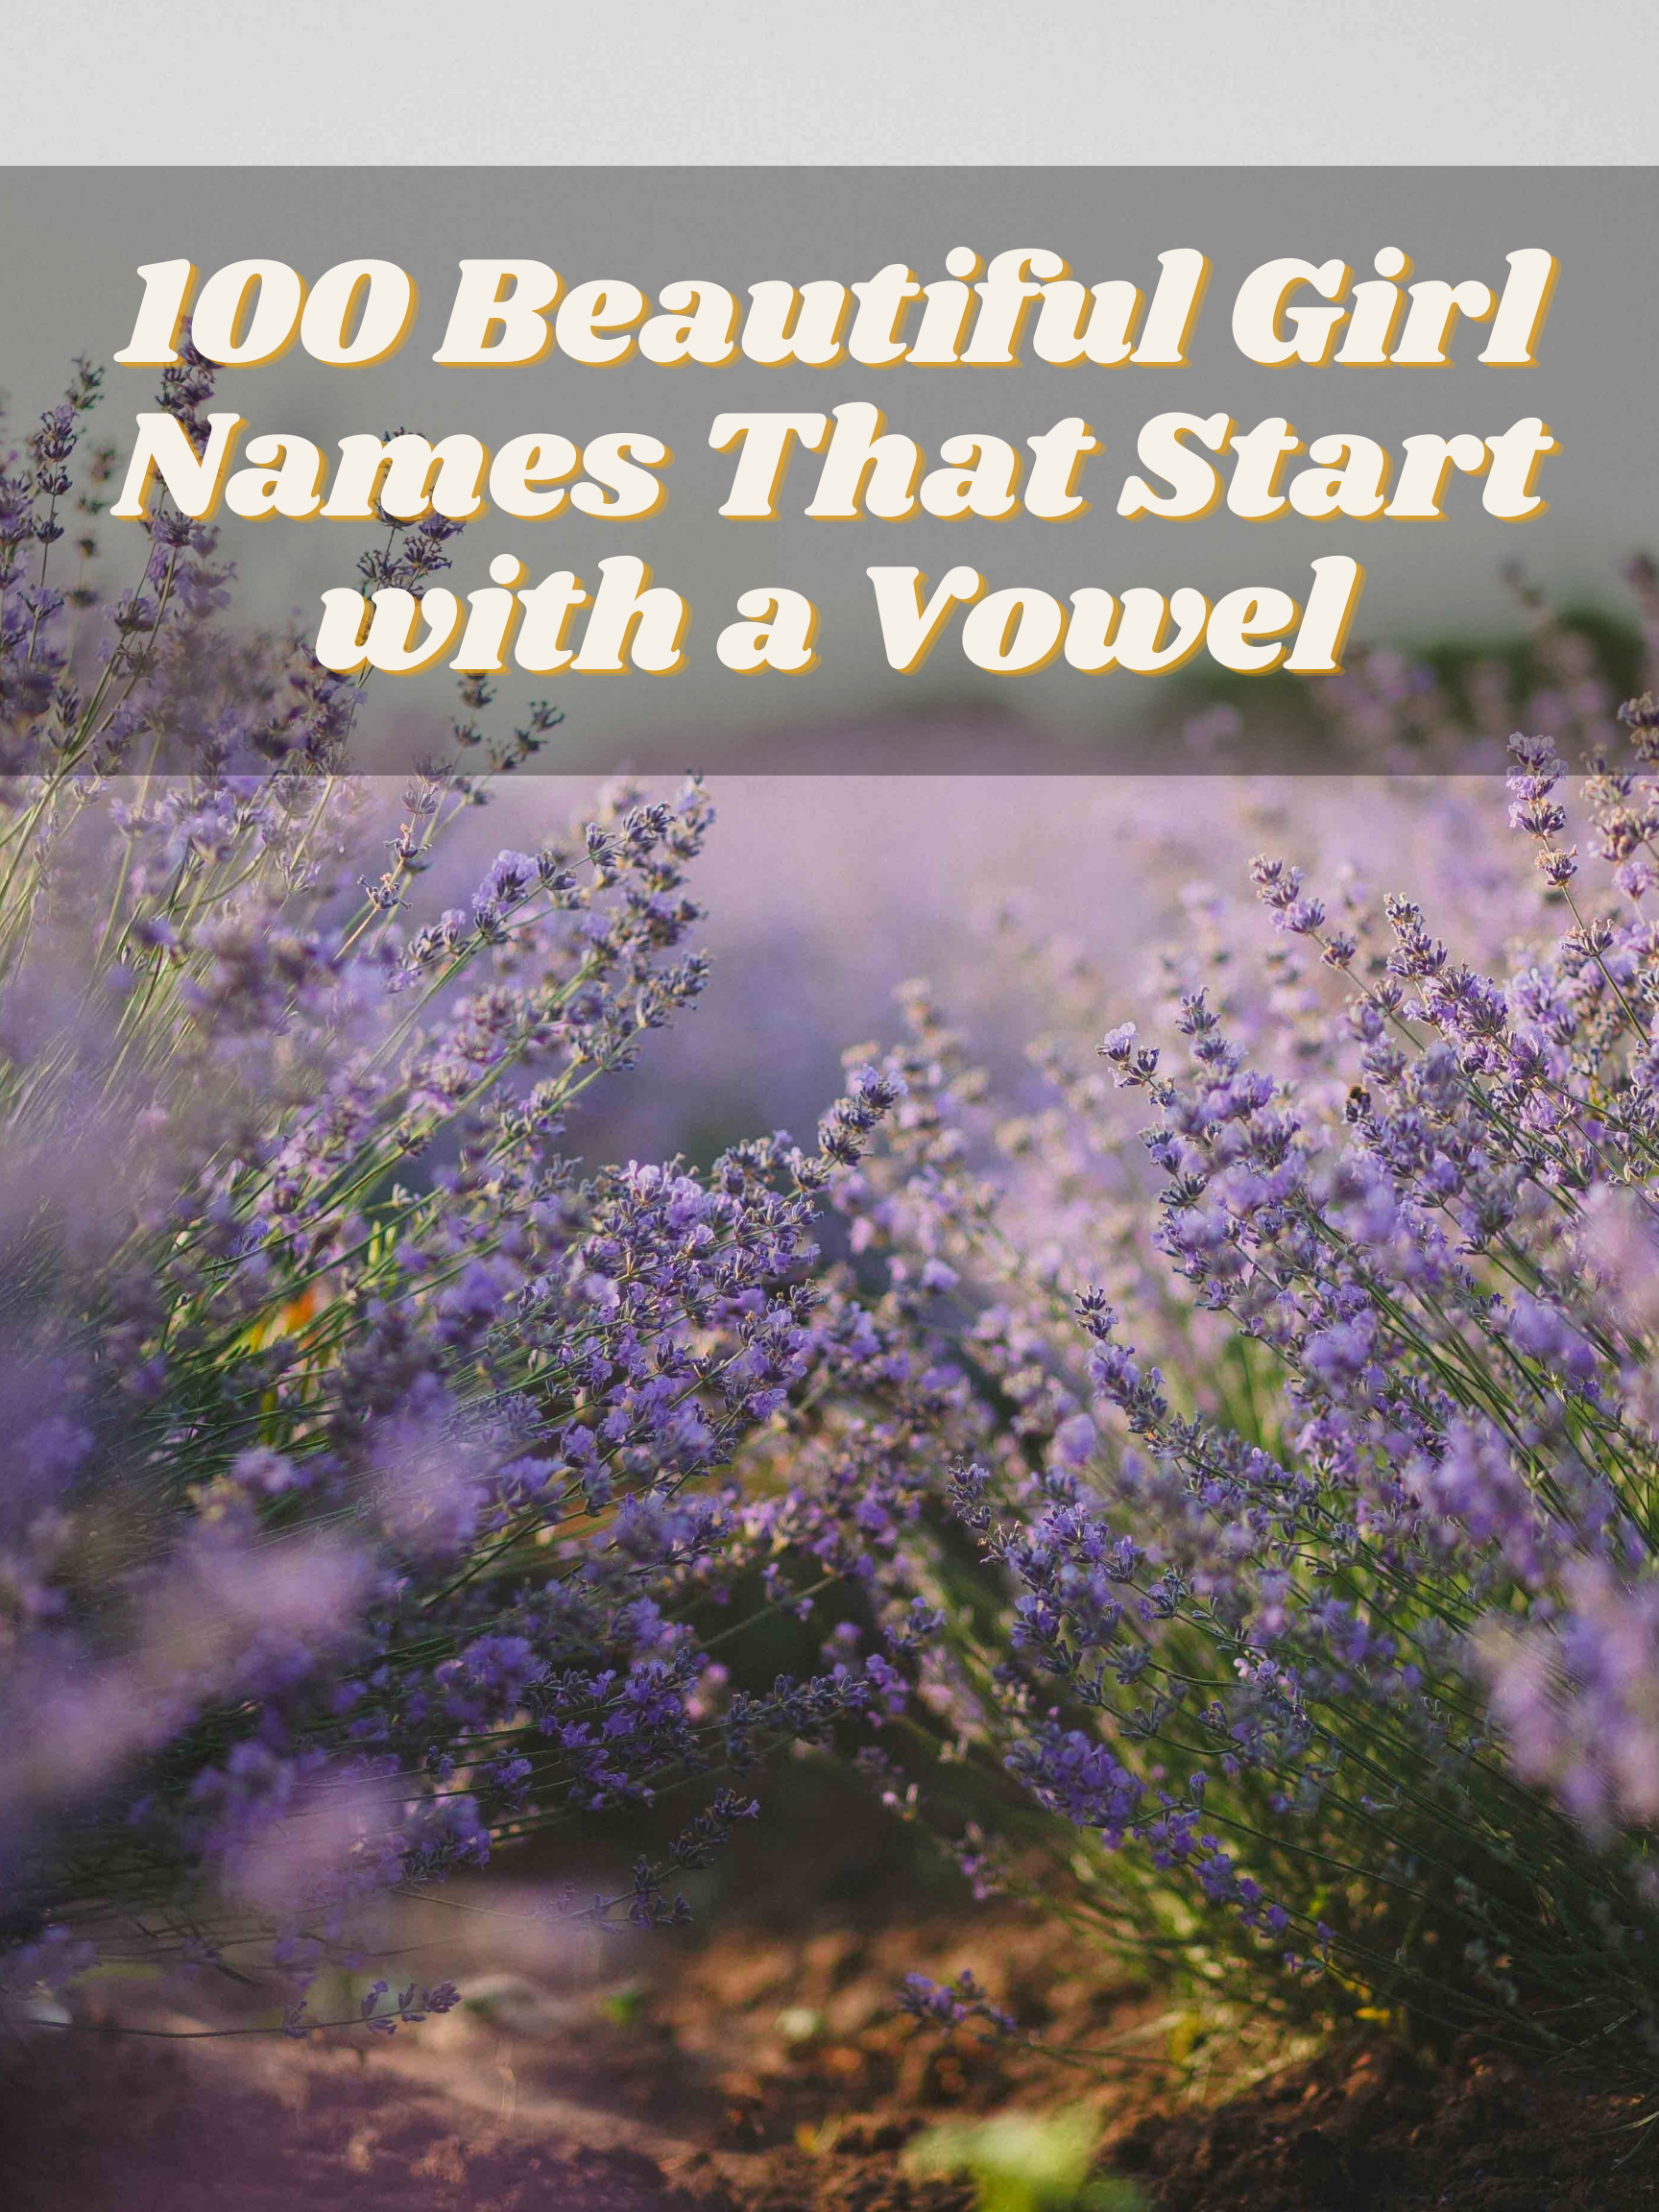 100 Beautiful Girl Names That Start with a Vowel